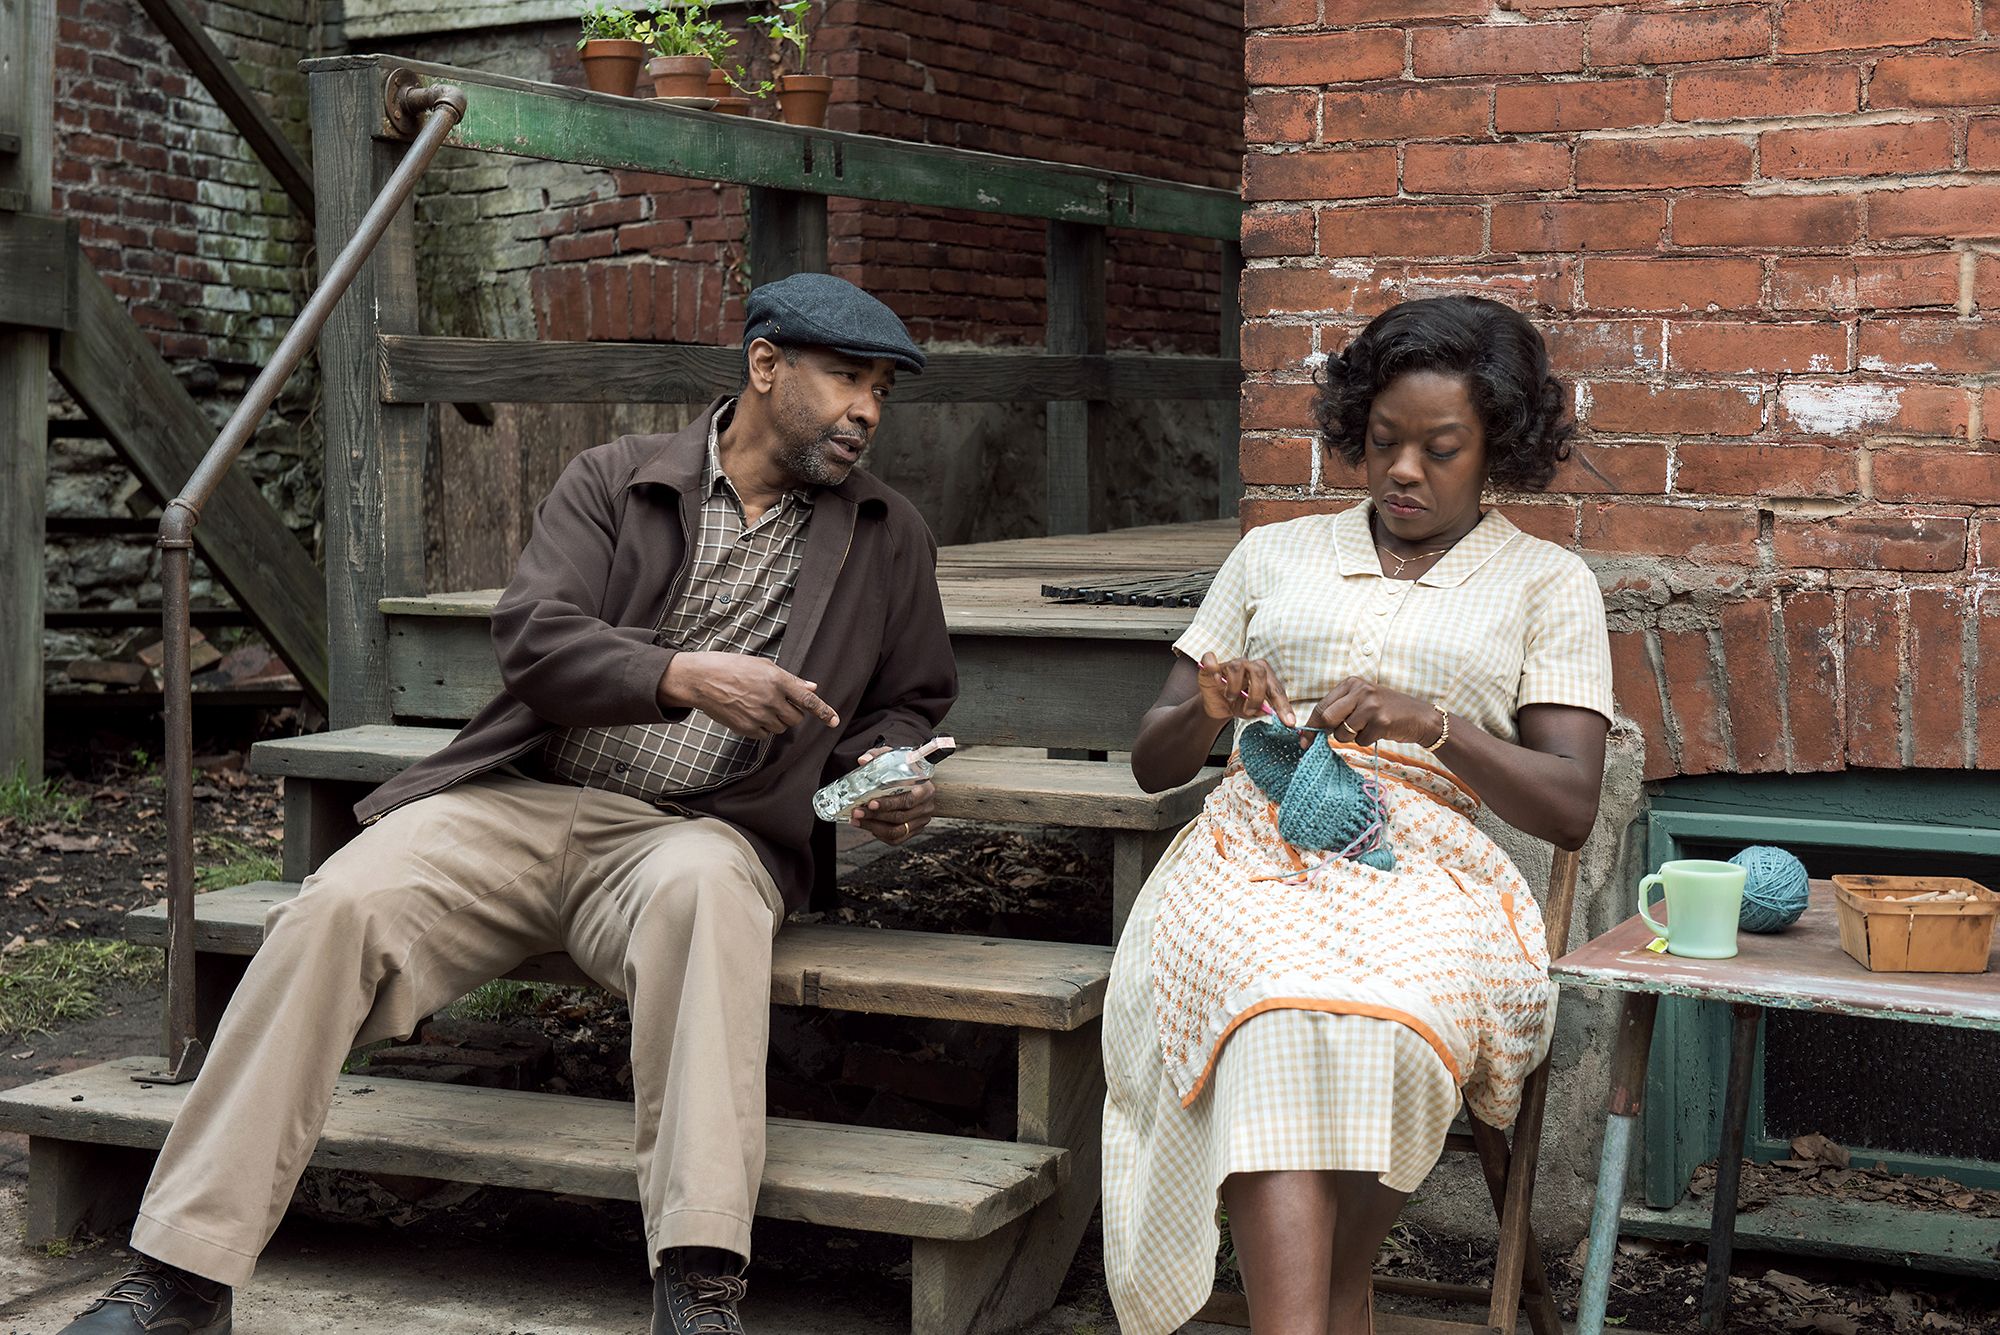 Denzel Washington and Viola Davis reprise their Broadway roles as Troy and Rose Maxson in “Fences.”